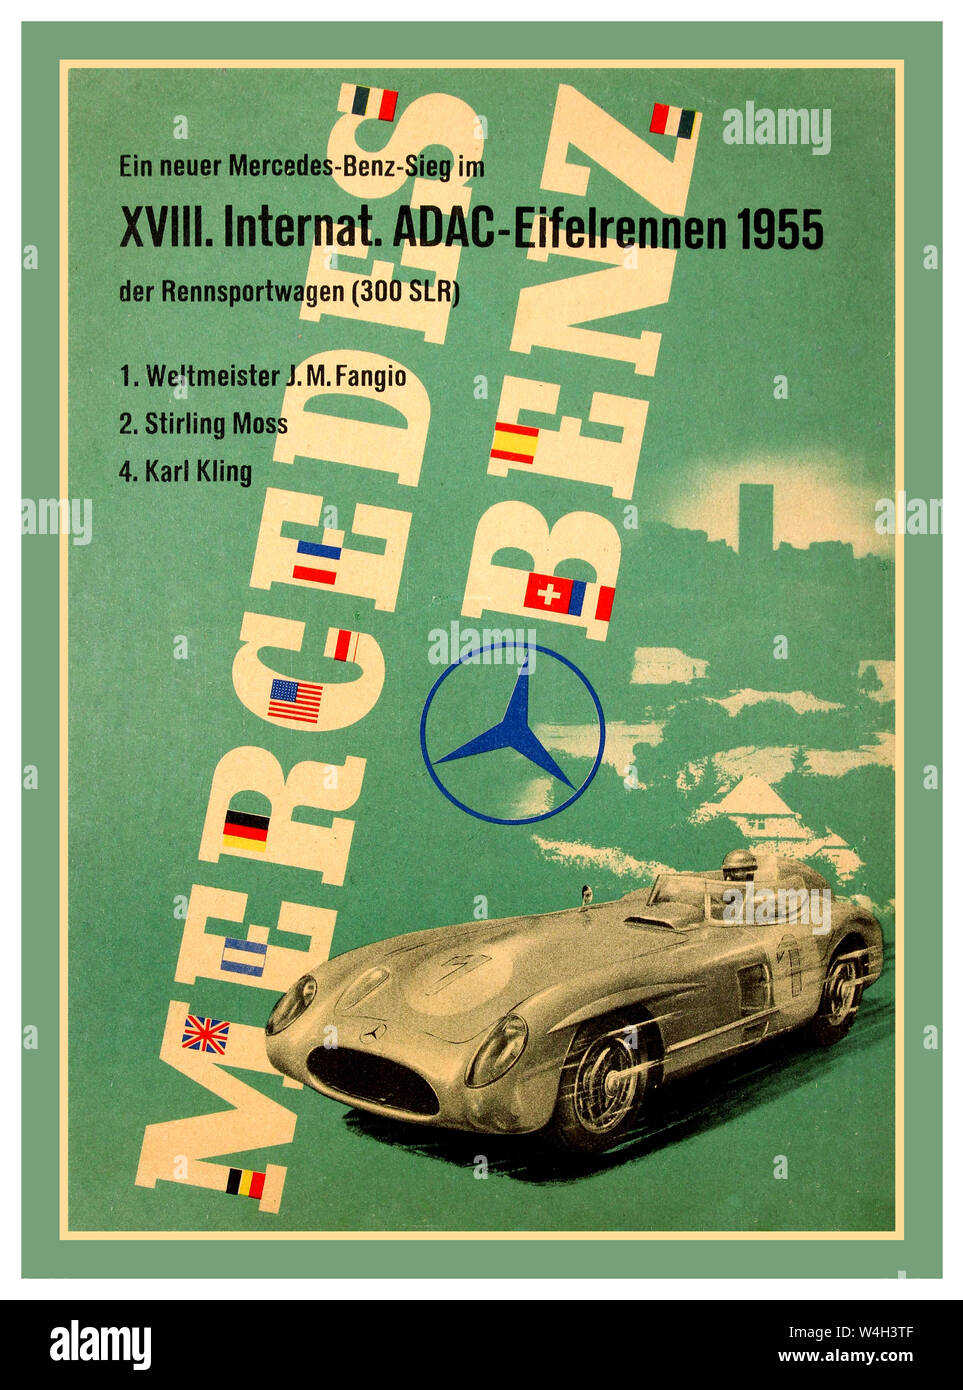 Original 1950's vintage motor sport advertising poster for the Mercedes Benz 300 SL victories at the XVIII International Grand Prix ADAC Eifelrennen 1955 featuring the iconic Mercedes-Benz 300 SLR sports car racing at speed and stylised lettering for Mercedes Benz. Flags in the letters running through the centre with the Mercedes-Benz logo in blue and text listing the event winners: 1. world champion J.M. Fangio (Juan Manuel Fangio Deramo; 1911-1995) 2. Stirling Moss (Sir Stirling Craufurd 4. Karl Kling Stock Photo